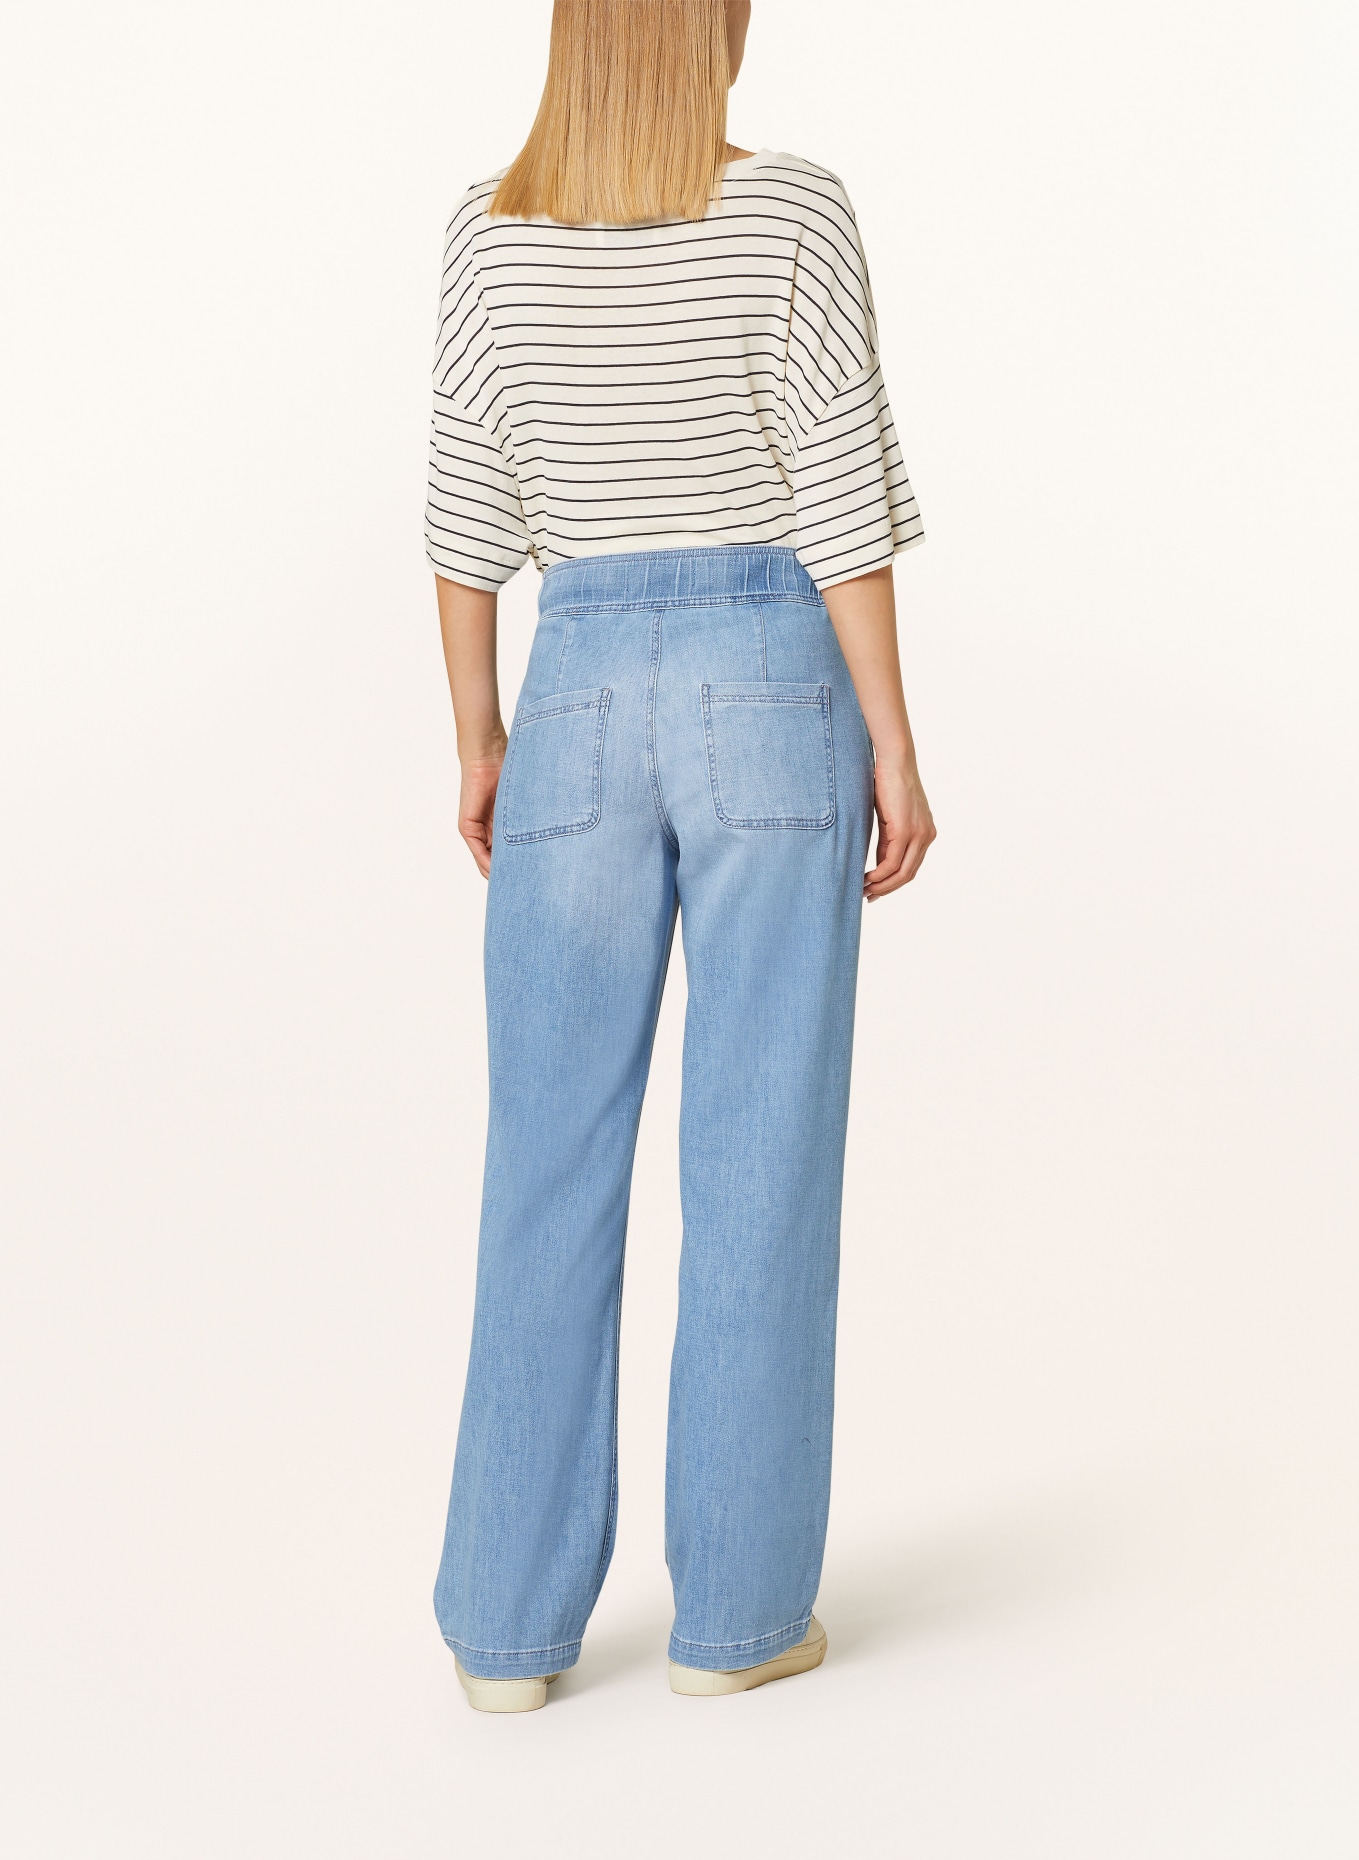 BRAX Trousers MAINE in denim look, Color: 28 USED BLEACHED BLUE (Image 3)